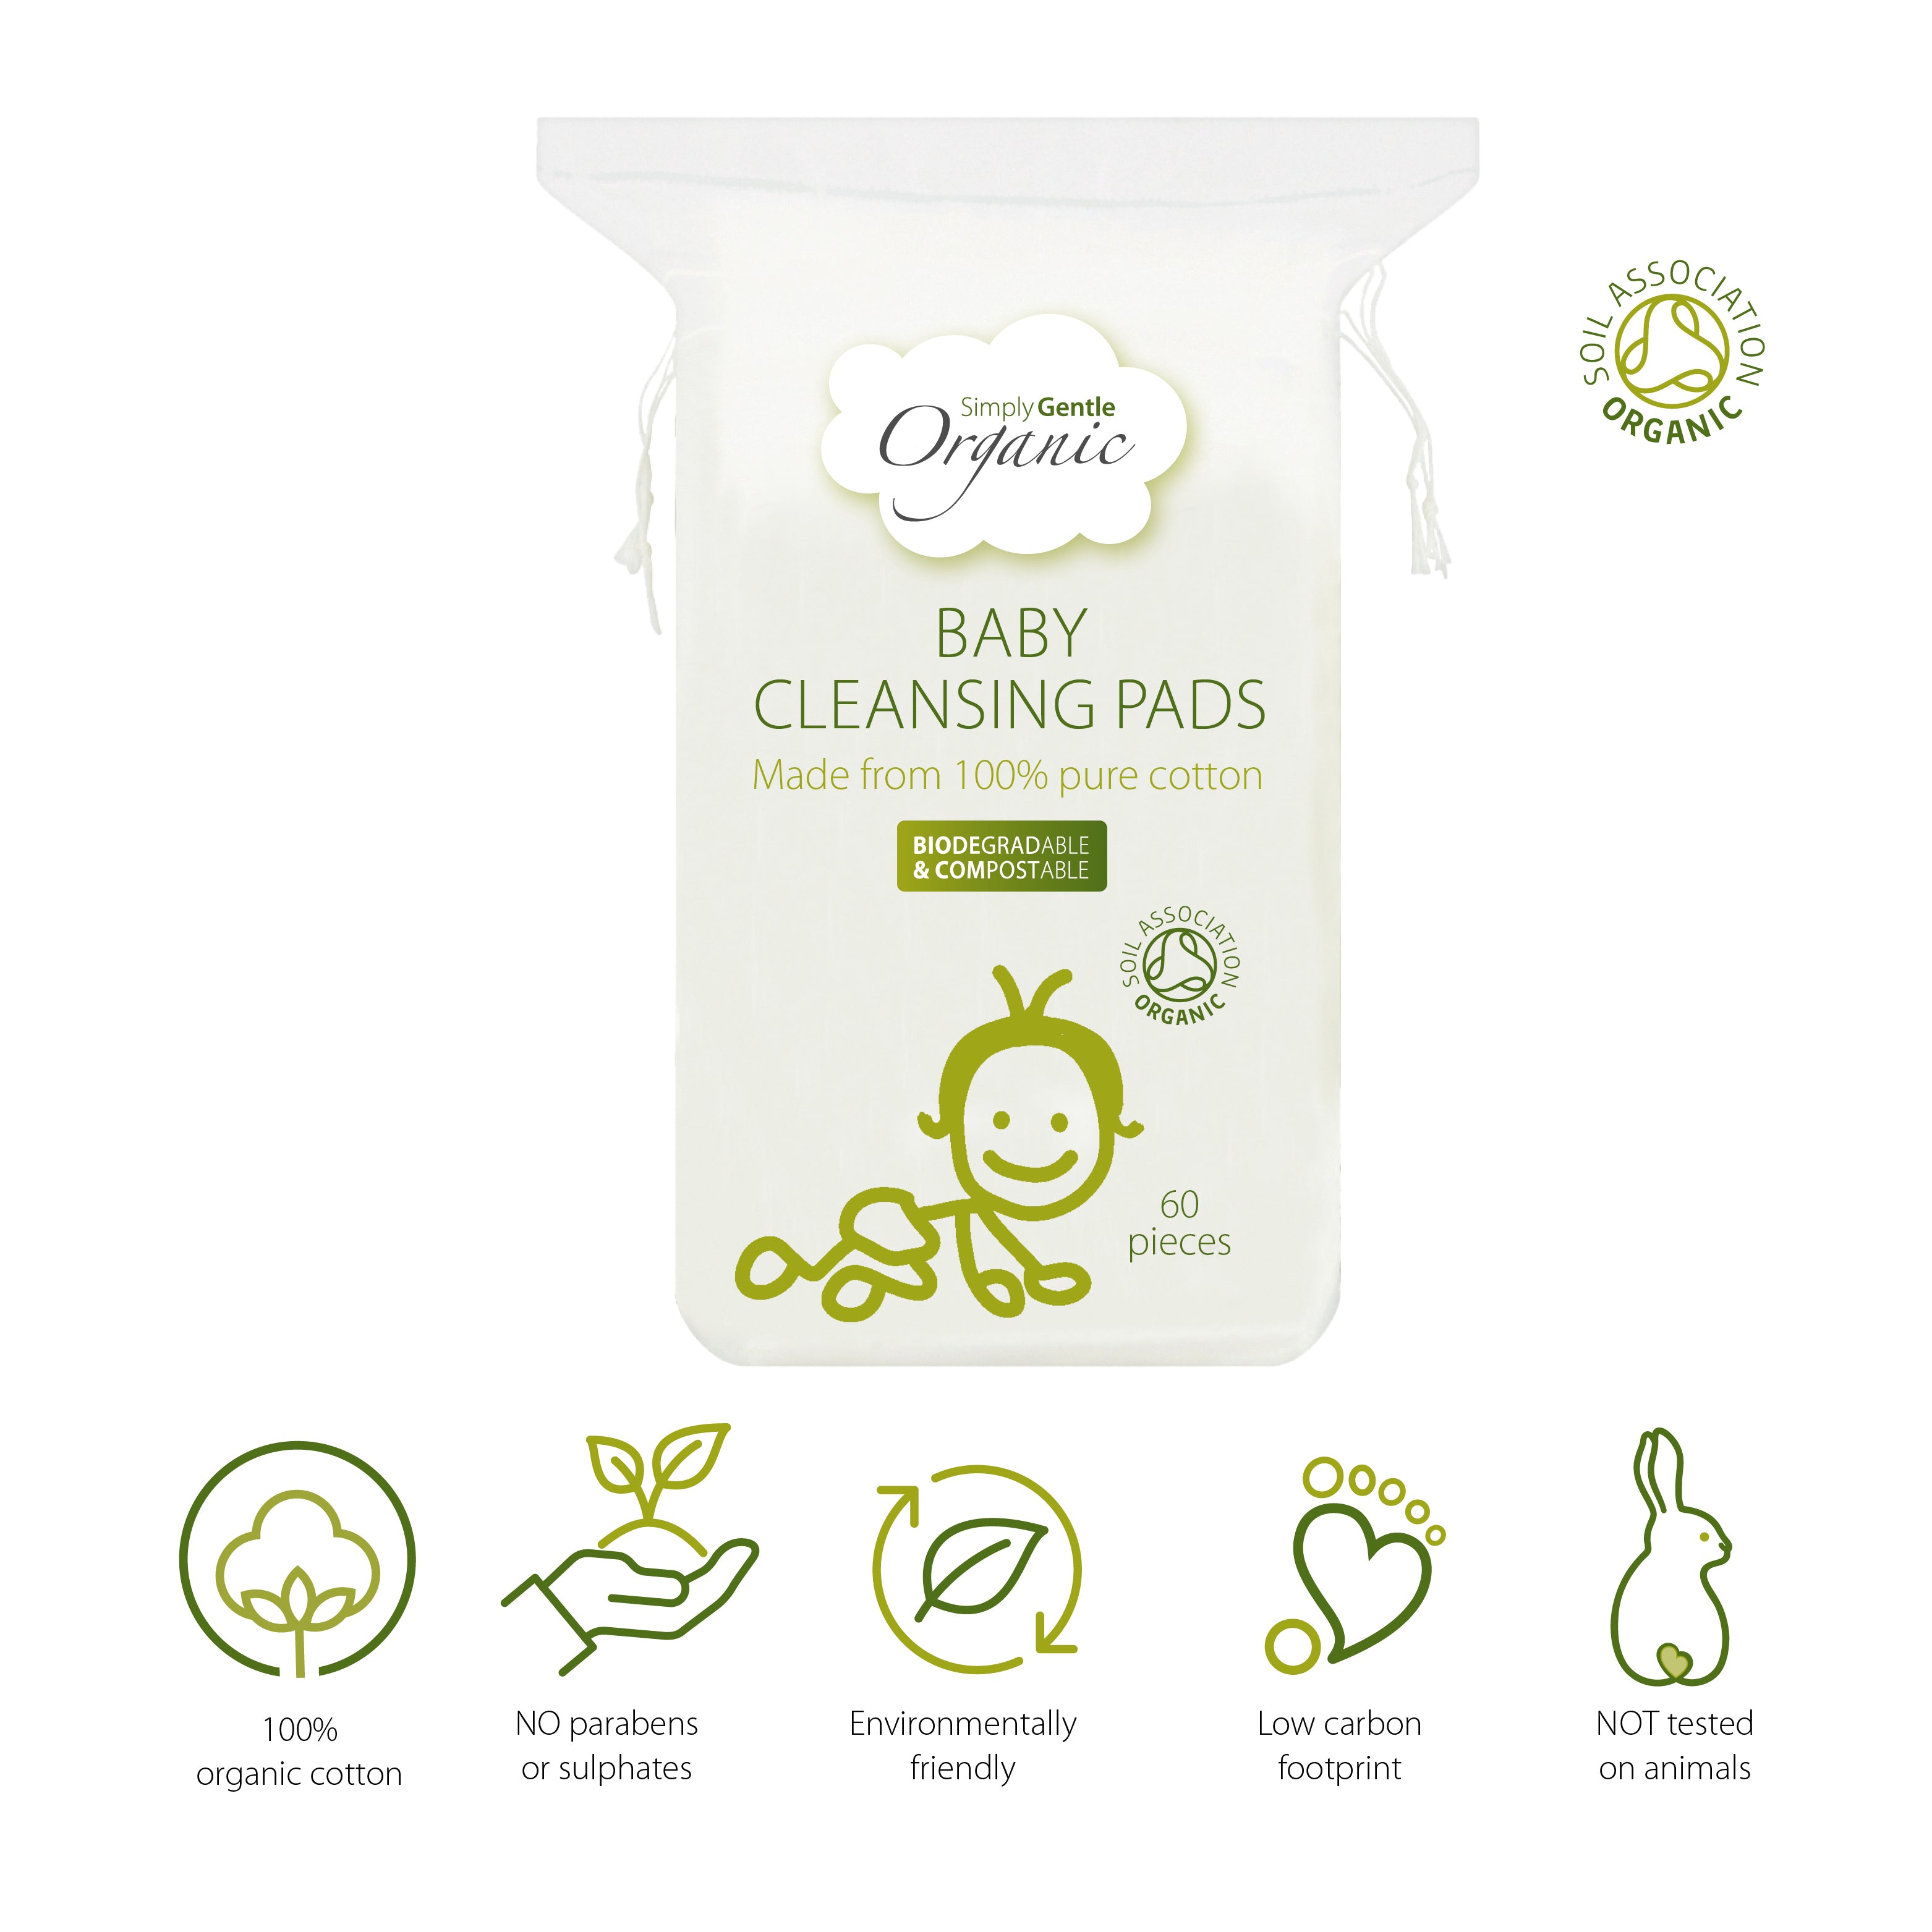 The Simply Gentle Organic Mother & Baby skincare range has been developed for maximum comfort and protection for both mothers and infants. Using a combination of natural and organic ingredients, using Simply Gentle’s products means that you are doing more than just looking after yourself and your baby, you are also looking after the environment in which you both grow.